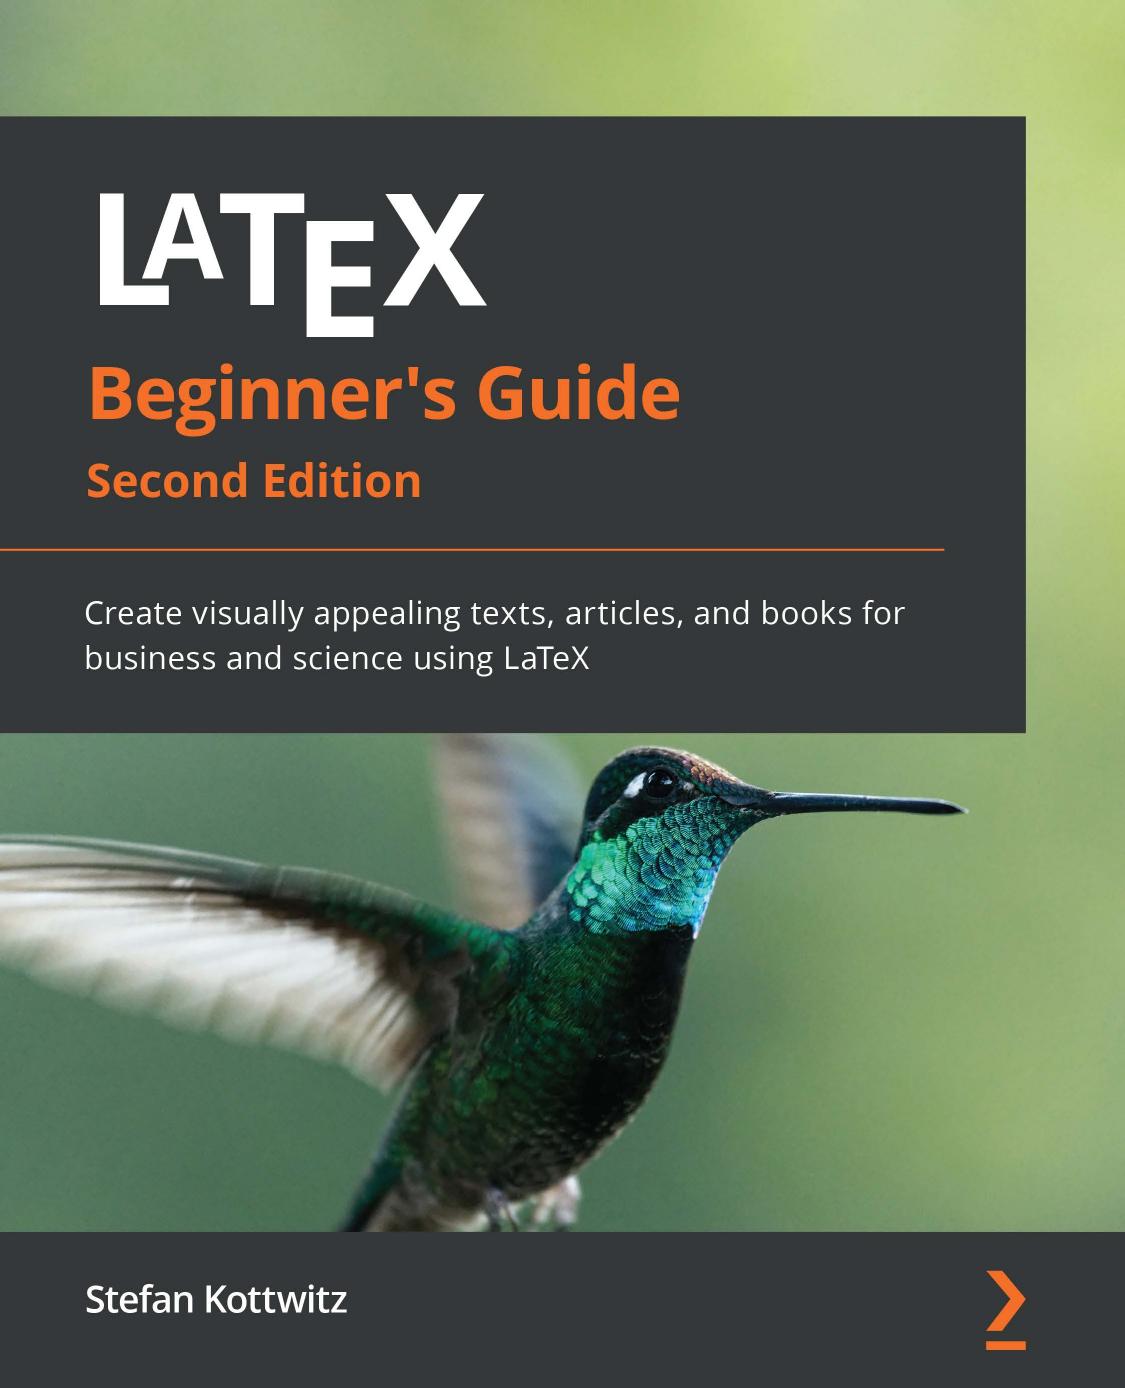 LaTeX Beginner's Guide: Create Visually Appealing Texts, Articles, and Books for Business and Science Using LaTeX, 2nd Edition